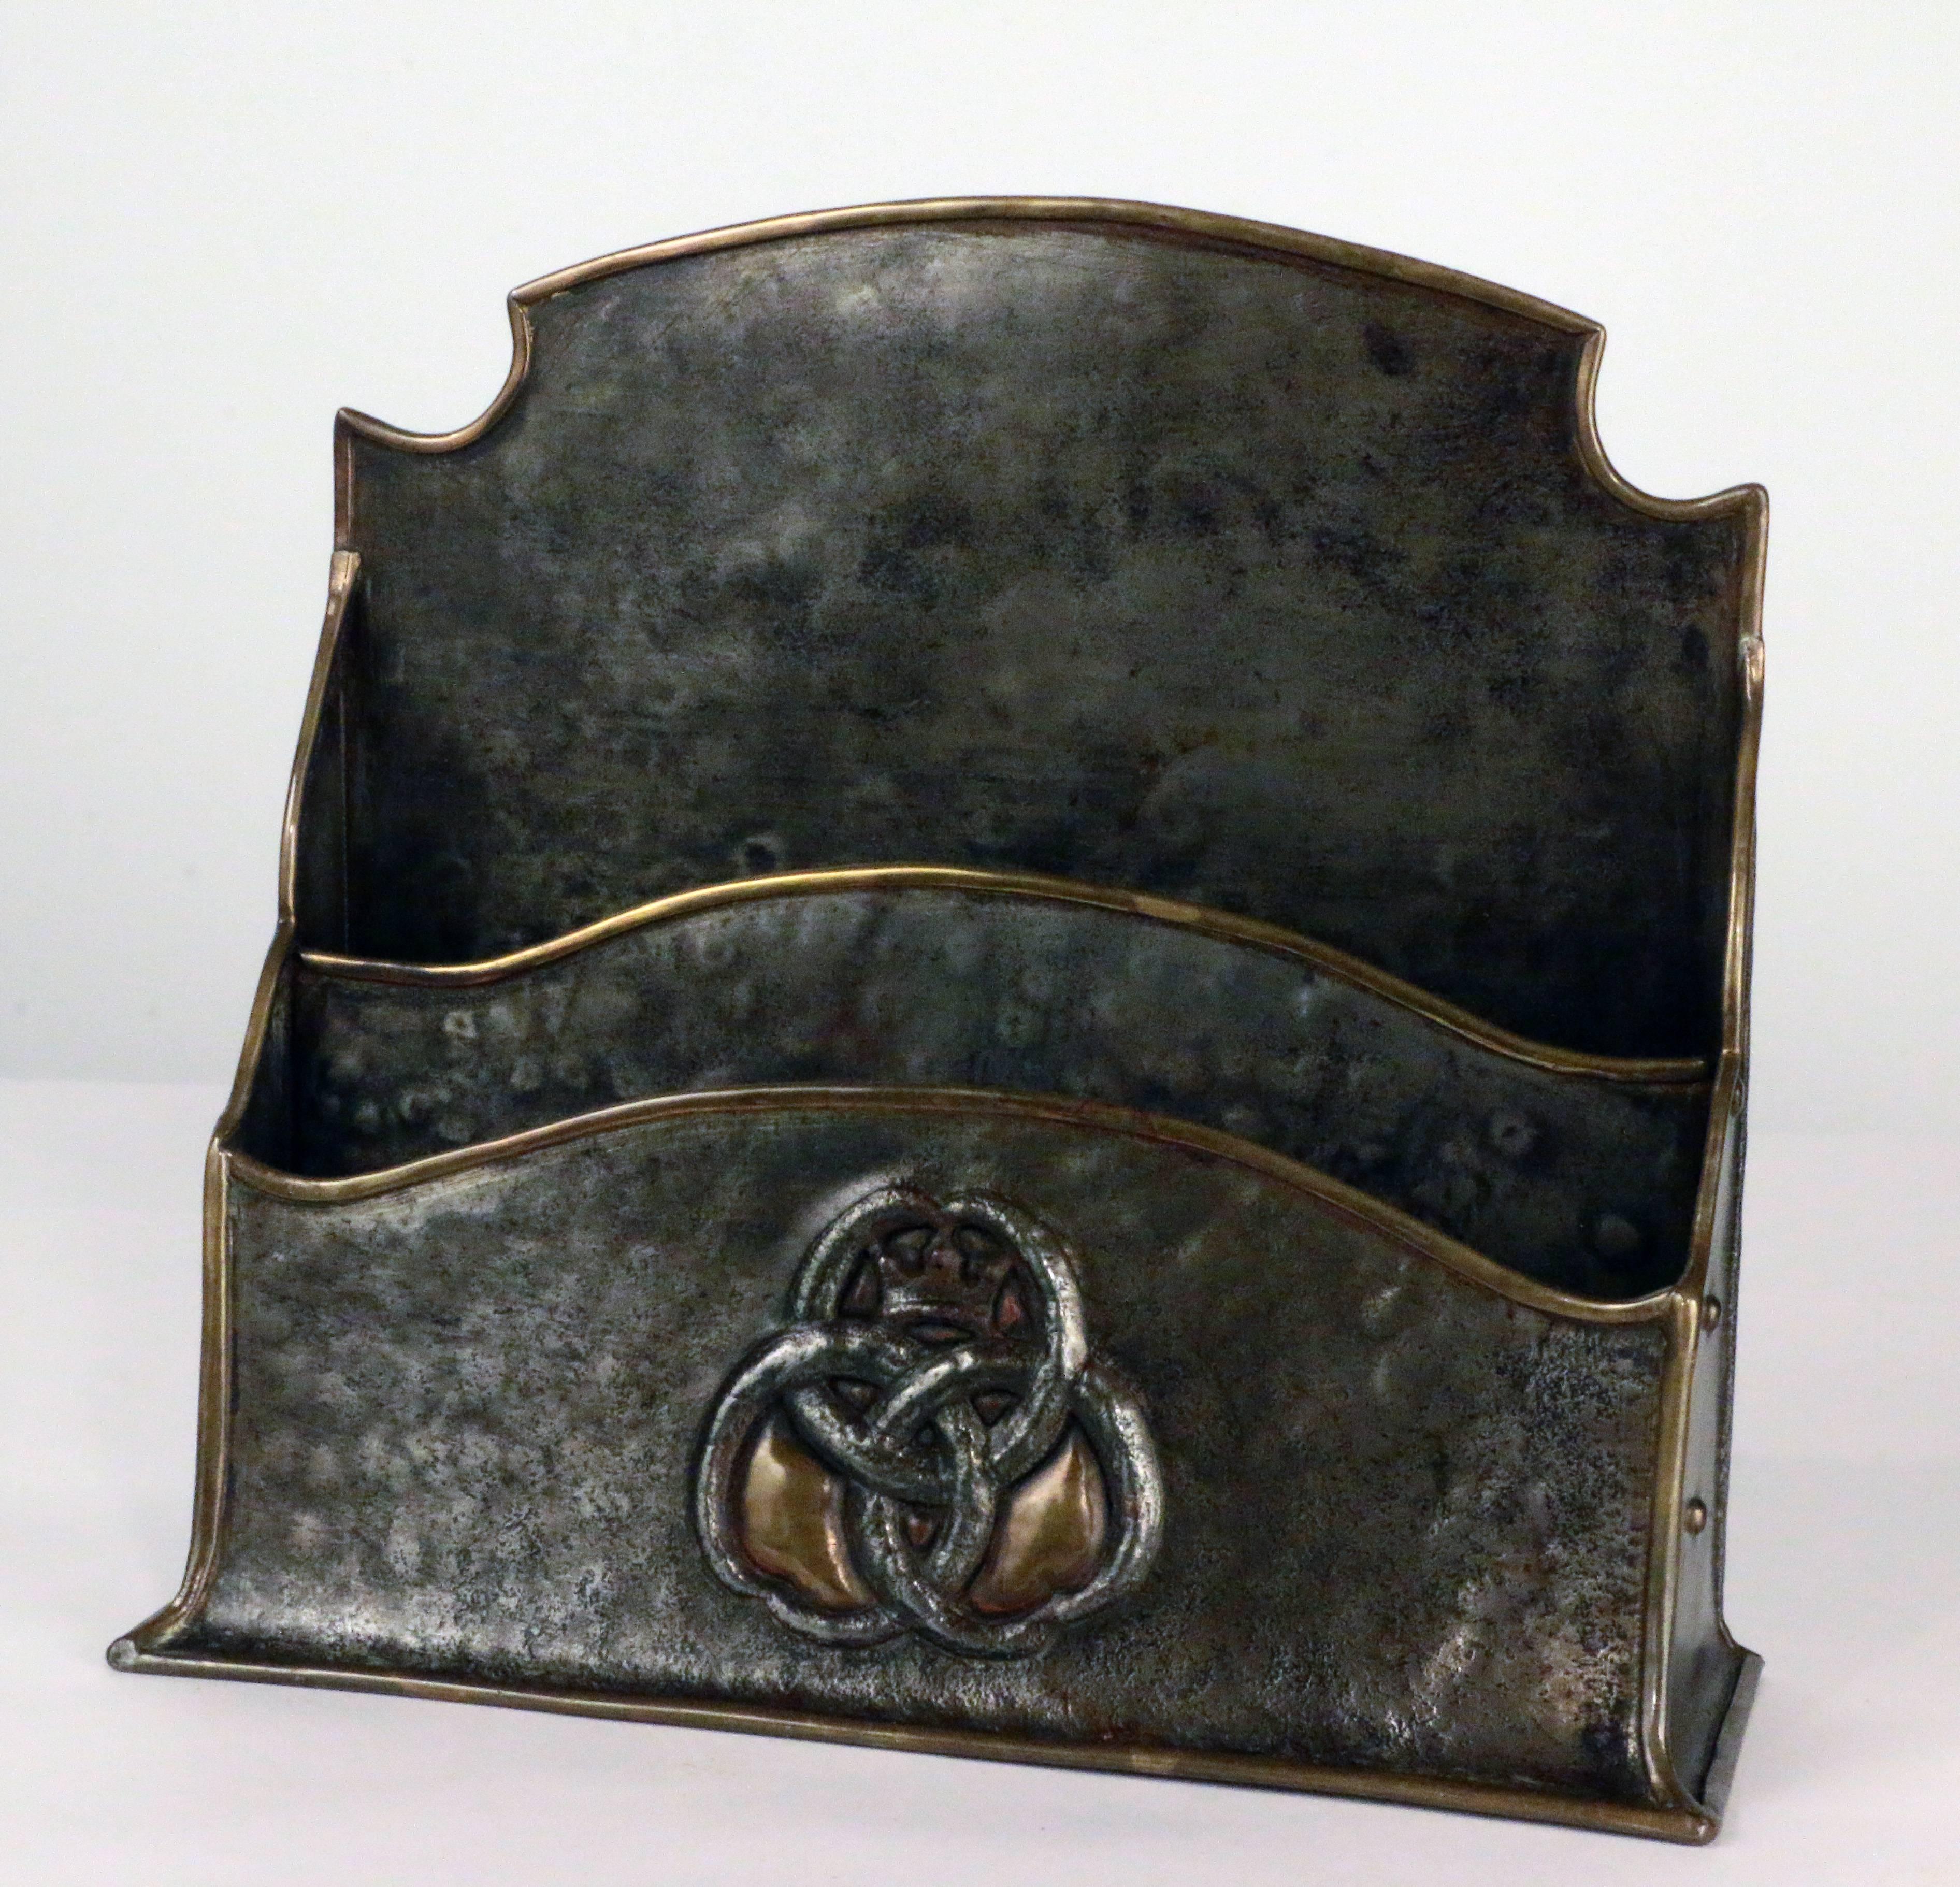 Paul Beau, doyen of Montreal Arts & Craft metal workers flourished in the first half of the 20th century. He was responsible for much fine work, in both private and public mileaux. His mixed metal work is particularly prized. This set is in steel